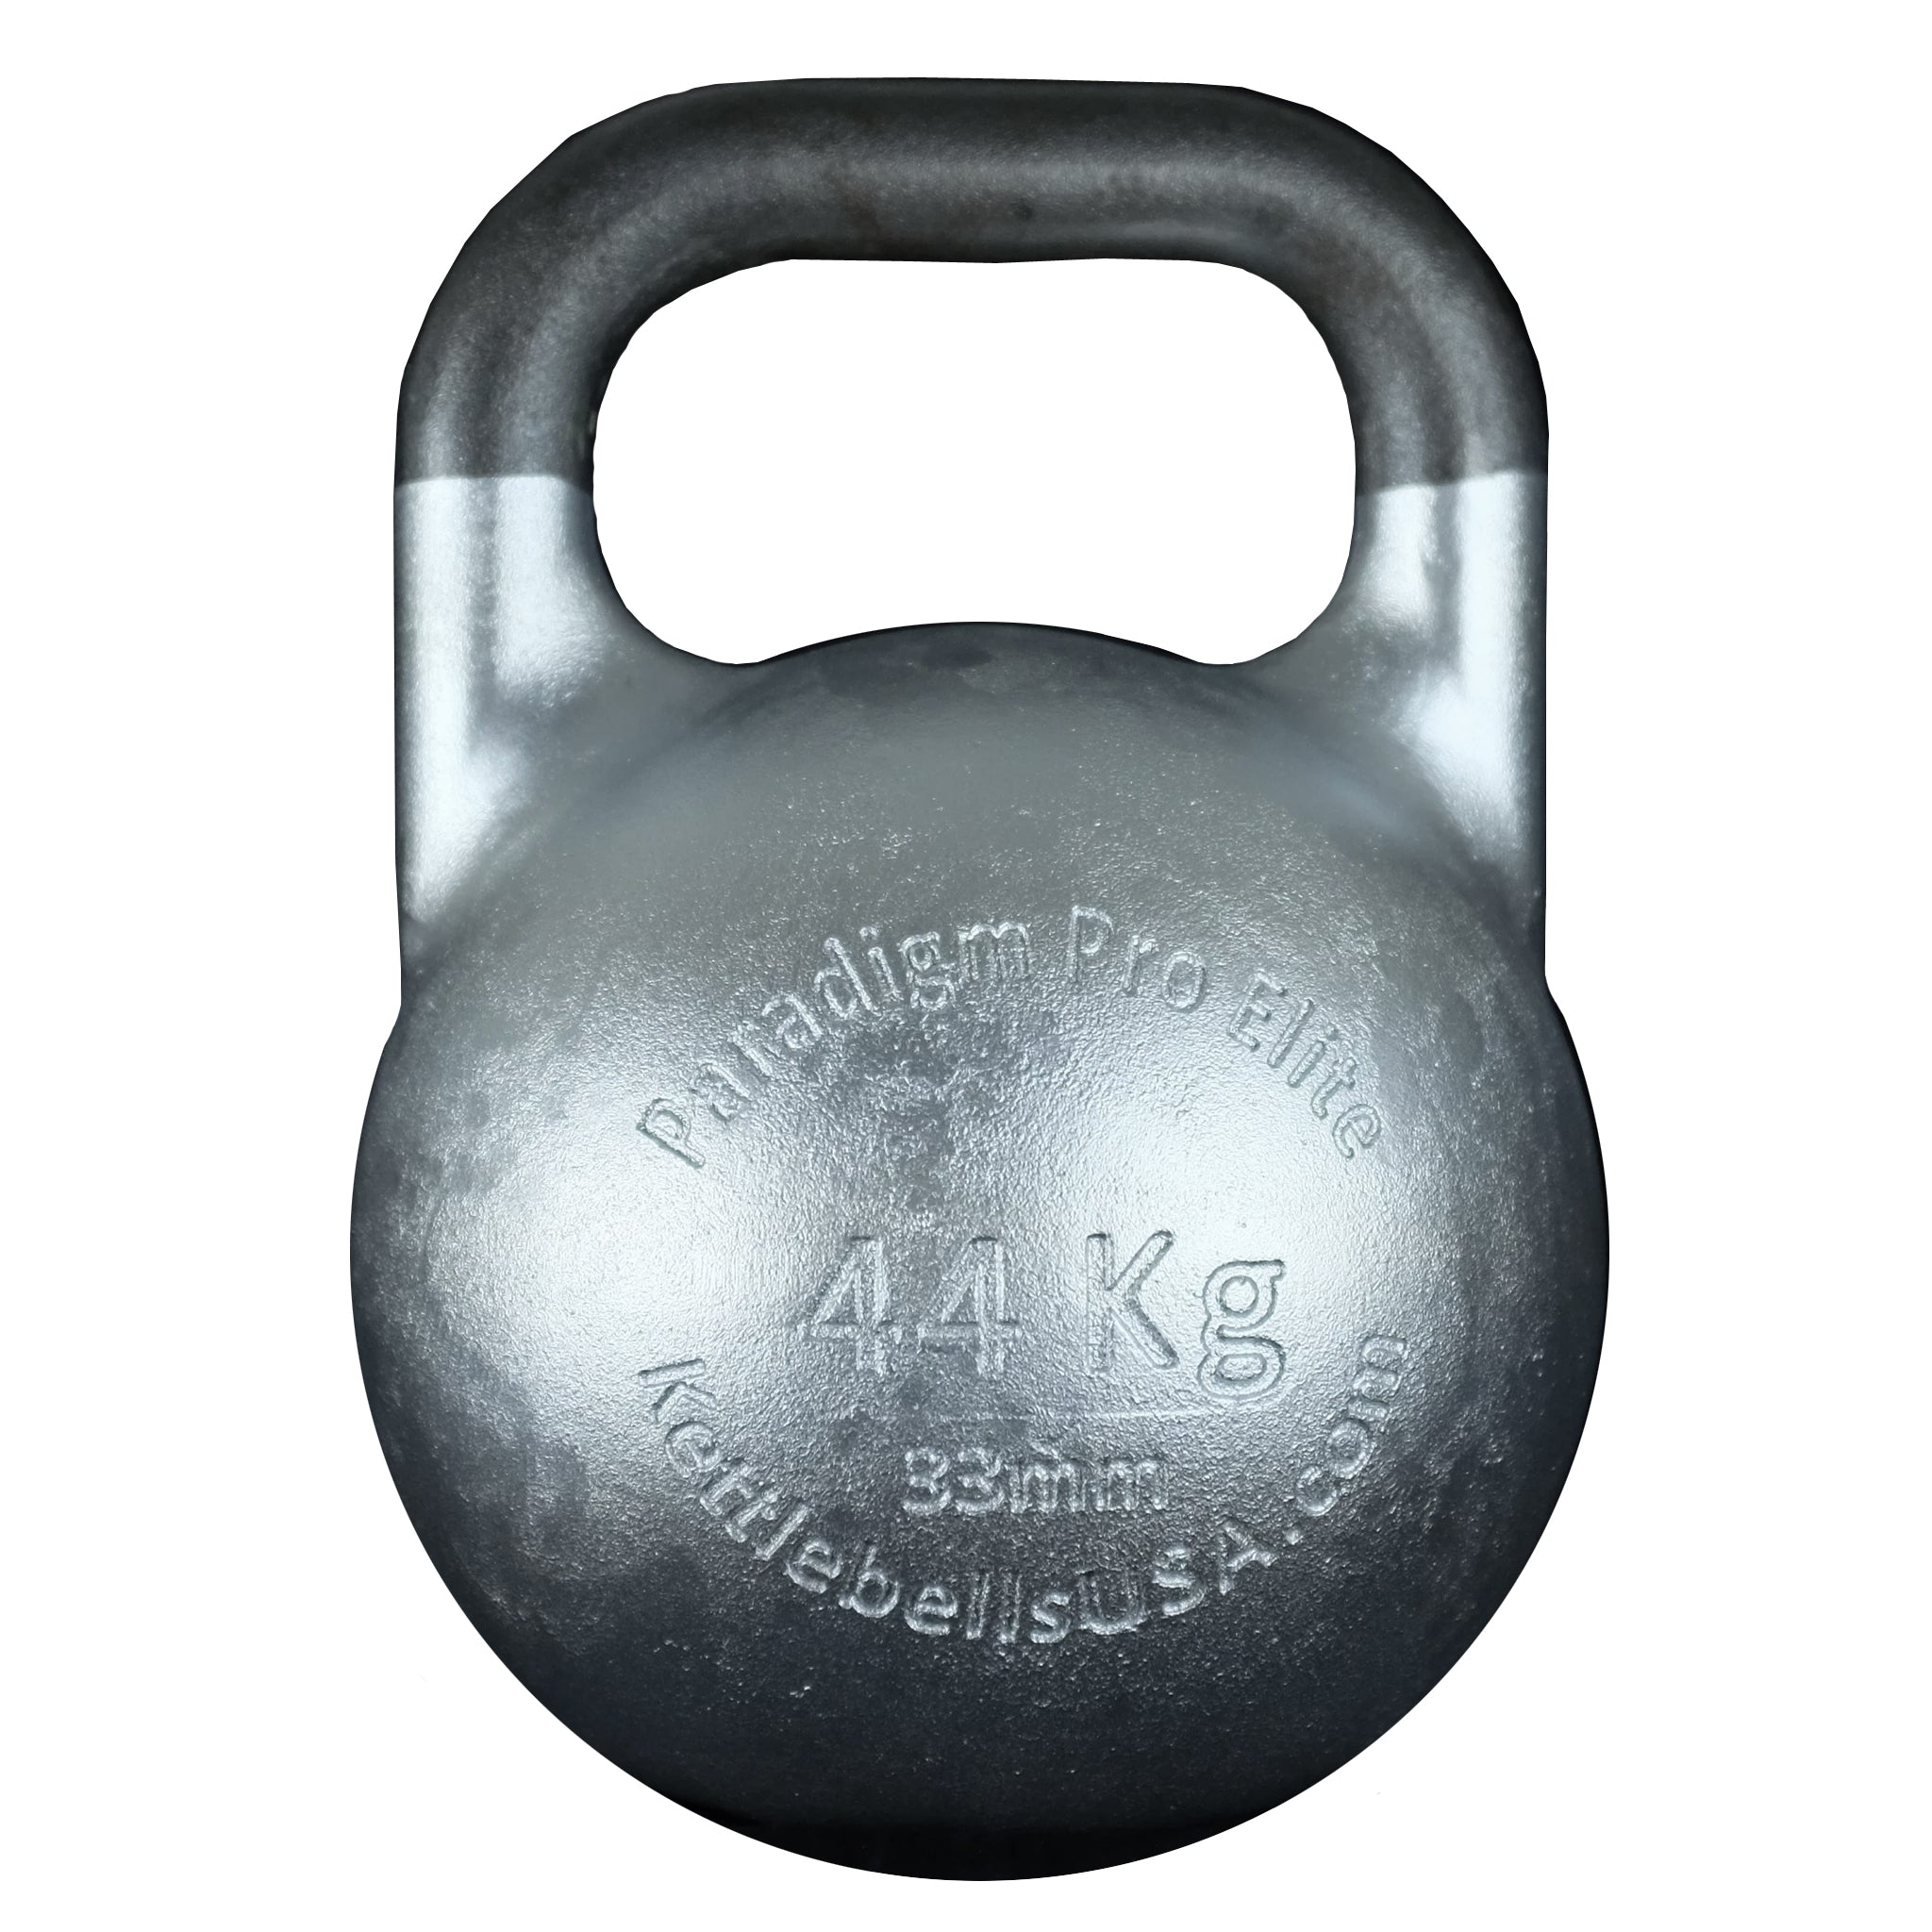 Paradigm Pro® Elite 33mm Handle Precision Competition Kettlebell – USA®